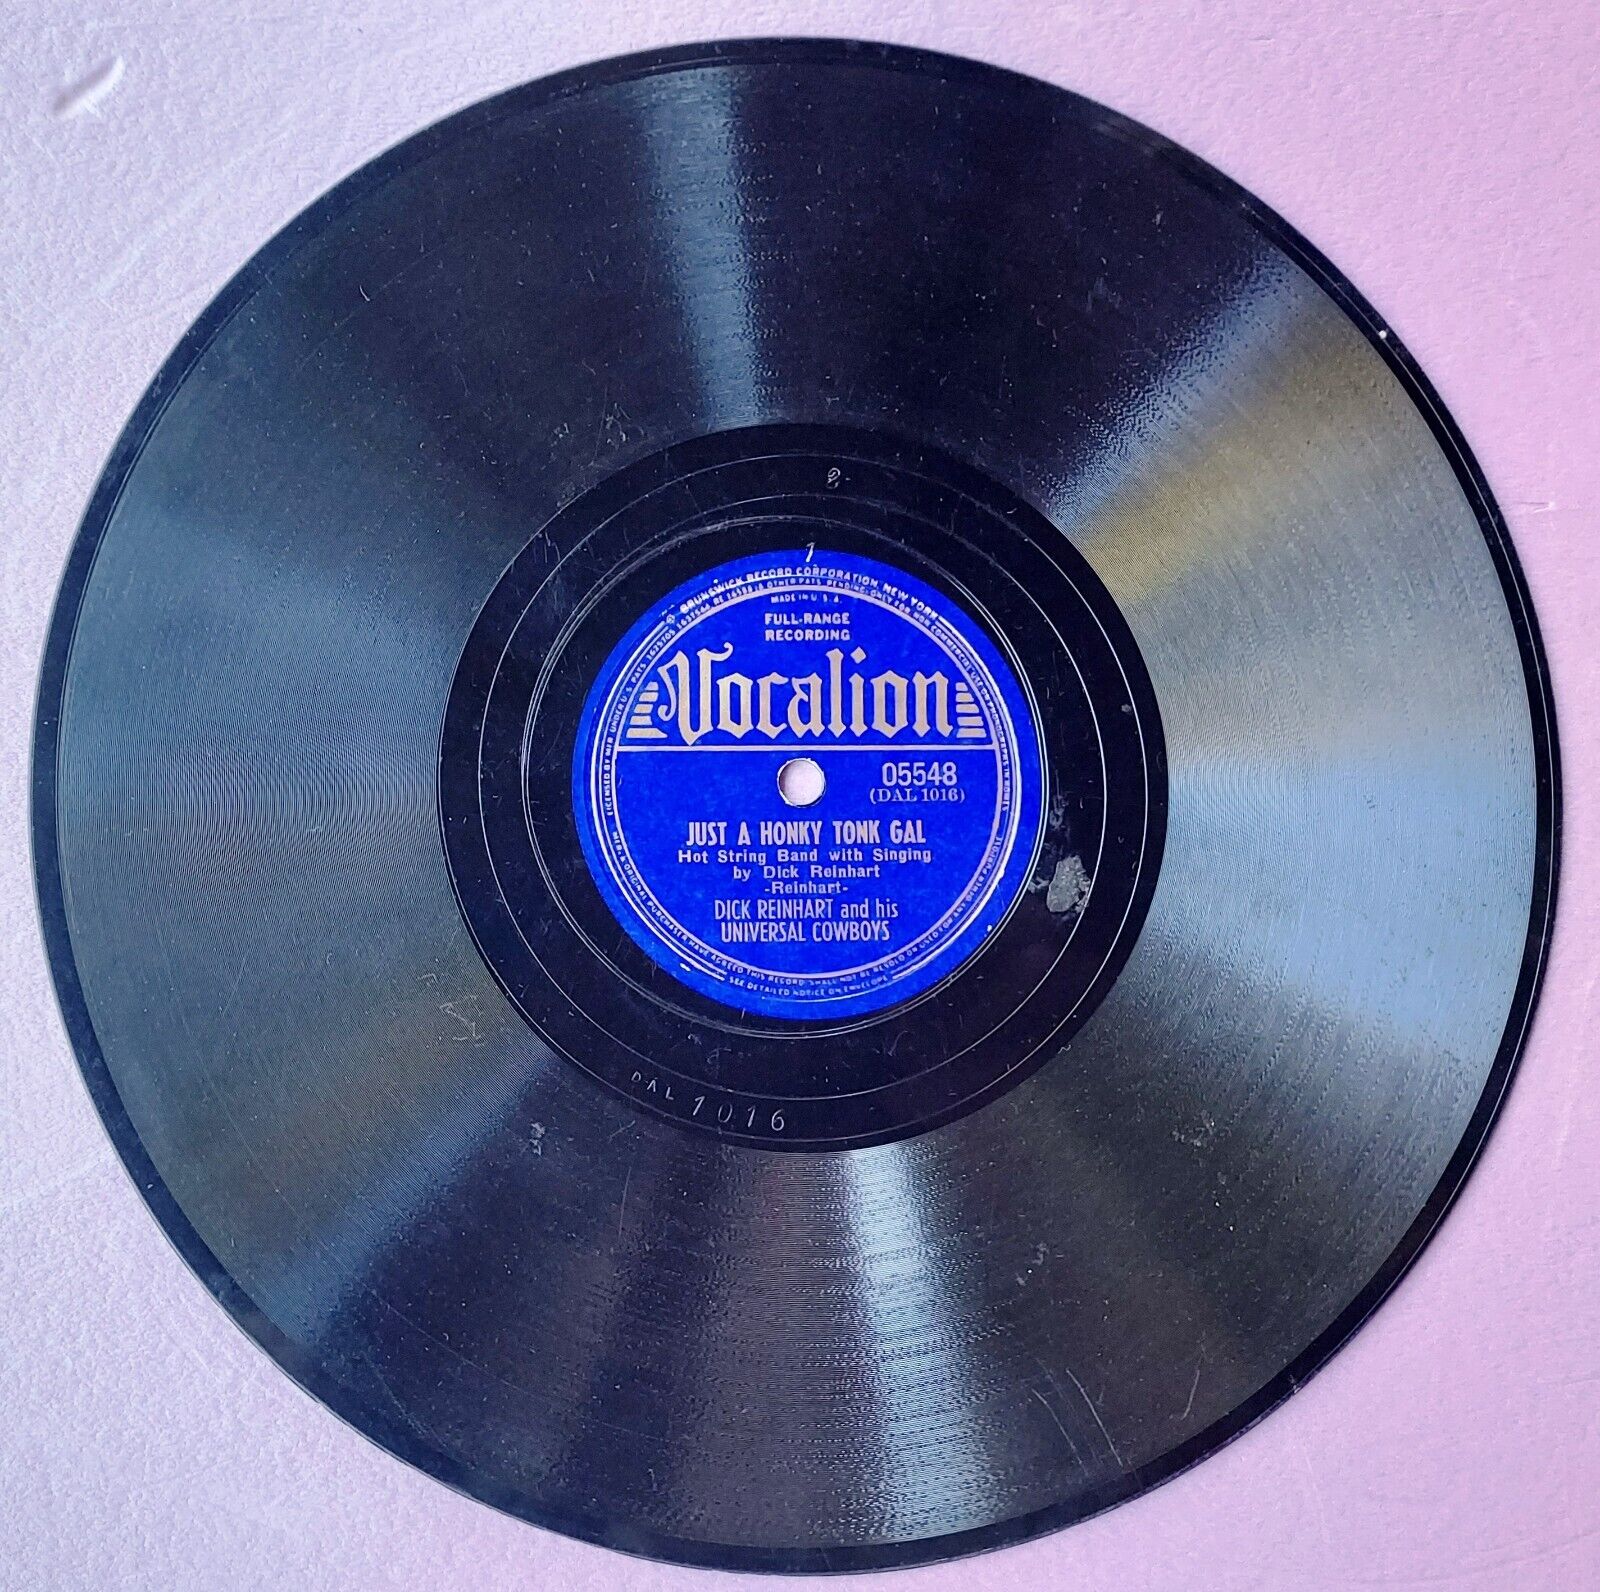 COUNTRY 78: DICK REINHART/UNIVERSAL COWBOYS Just a Honky Tonk Gal VOCALION *HEAR